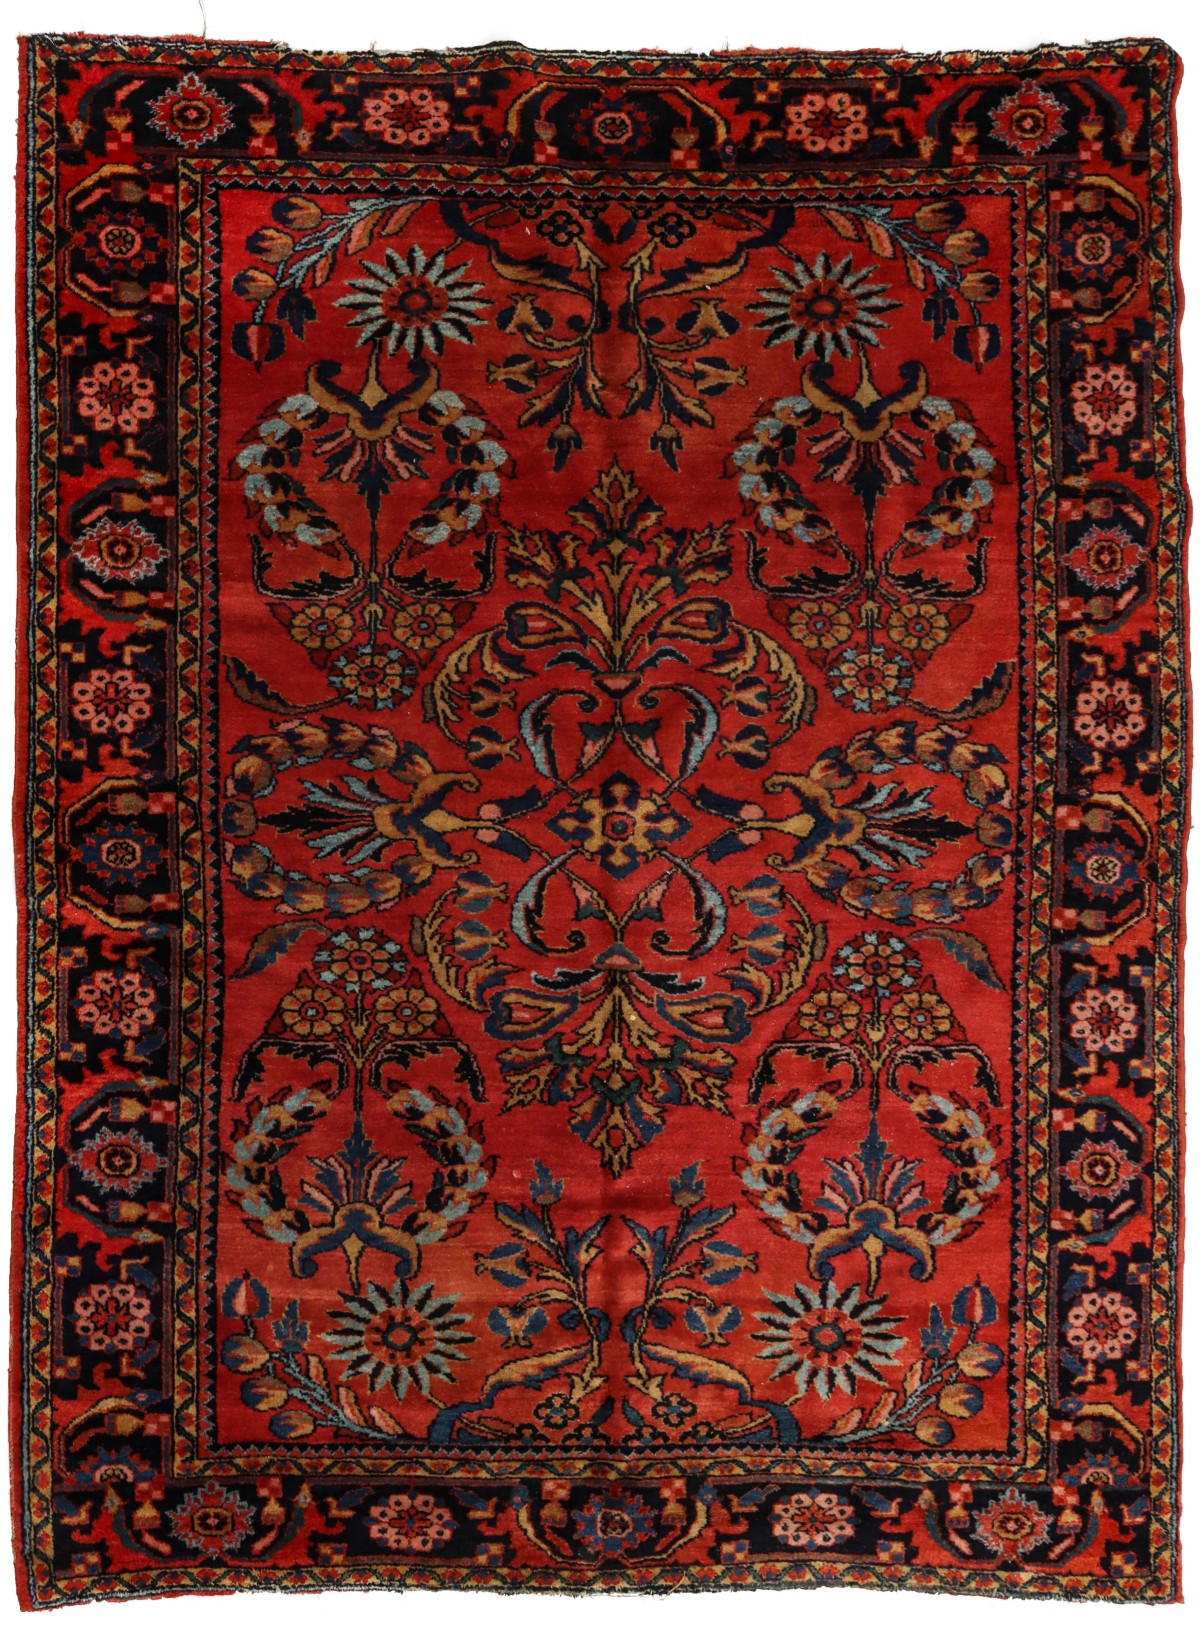 A FINE LUSTROUS EARLY 20TH CENTURY PERSIAN LILIHAN RUG